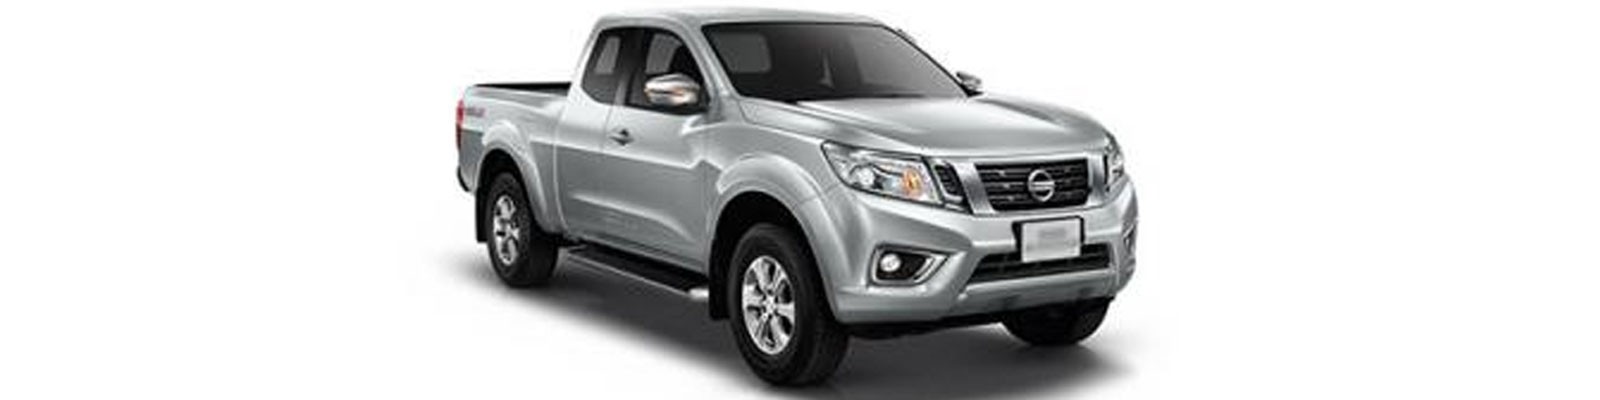 Accessories For 2016 Nissan Navara NP300 Extra Cab